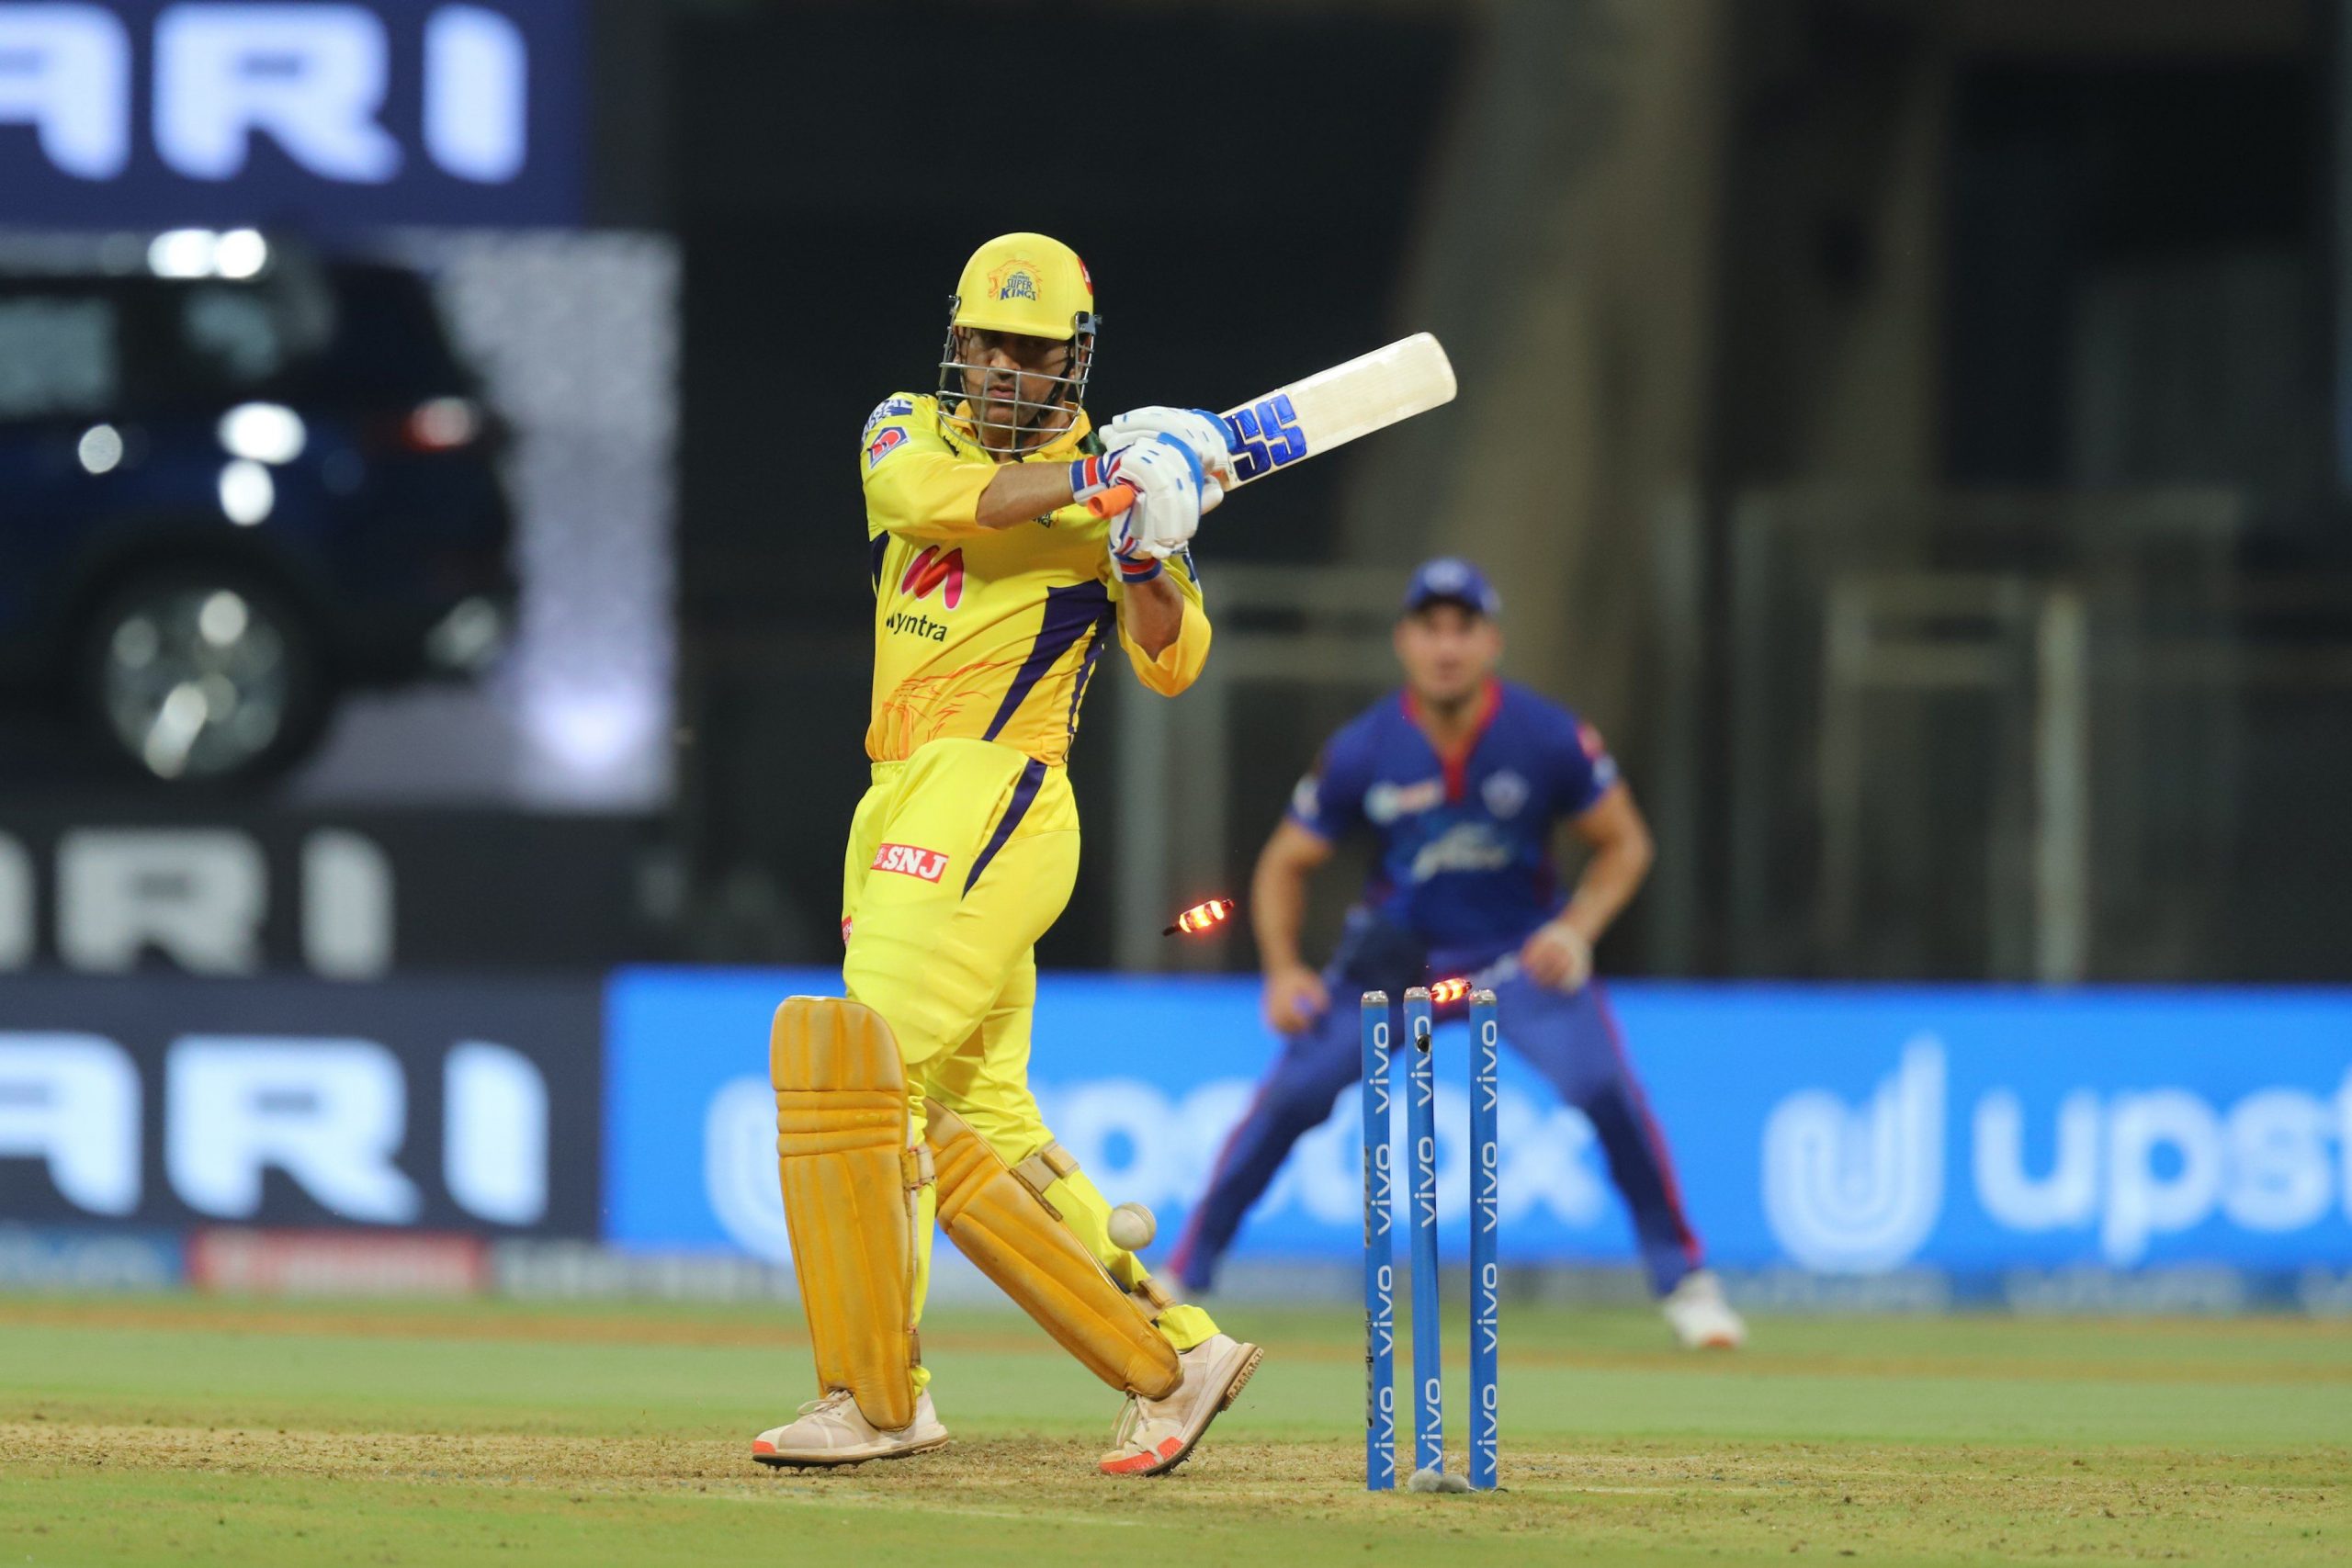 IPL 2021: CSK skipper MS Dhoni fined for slow over rate against DC